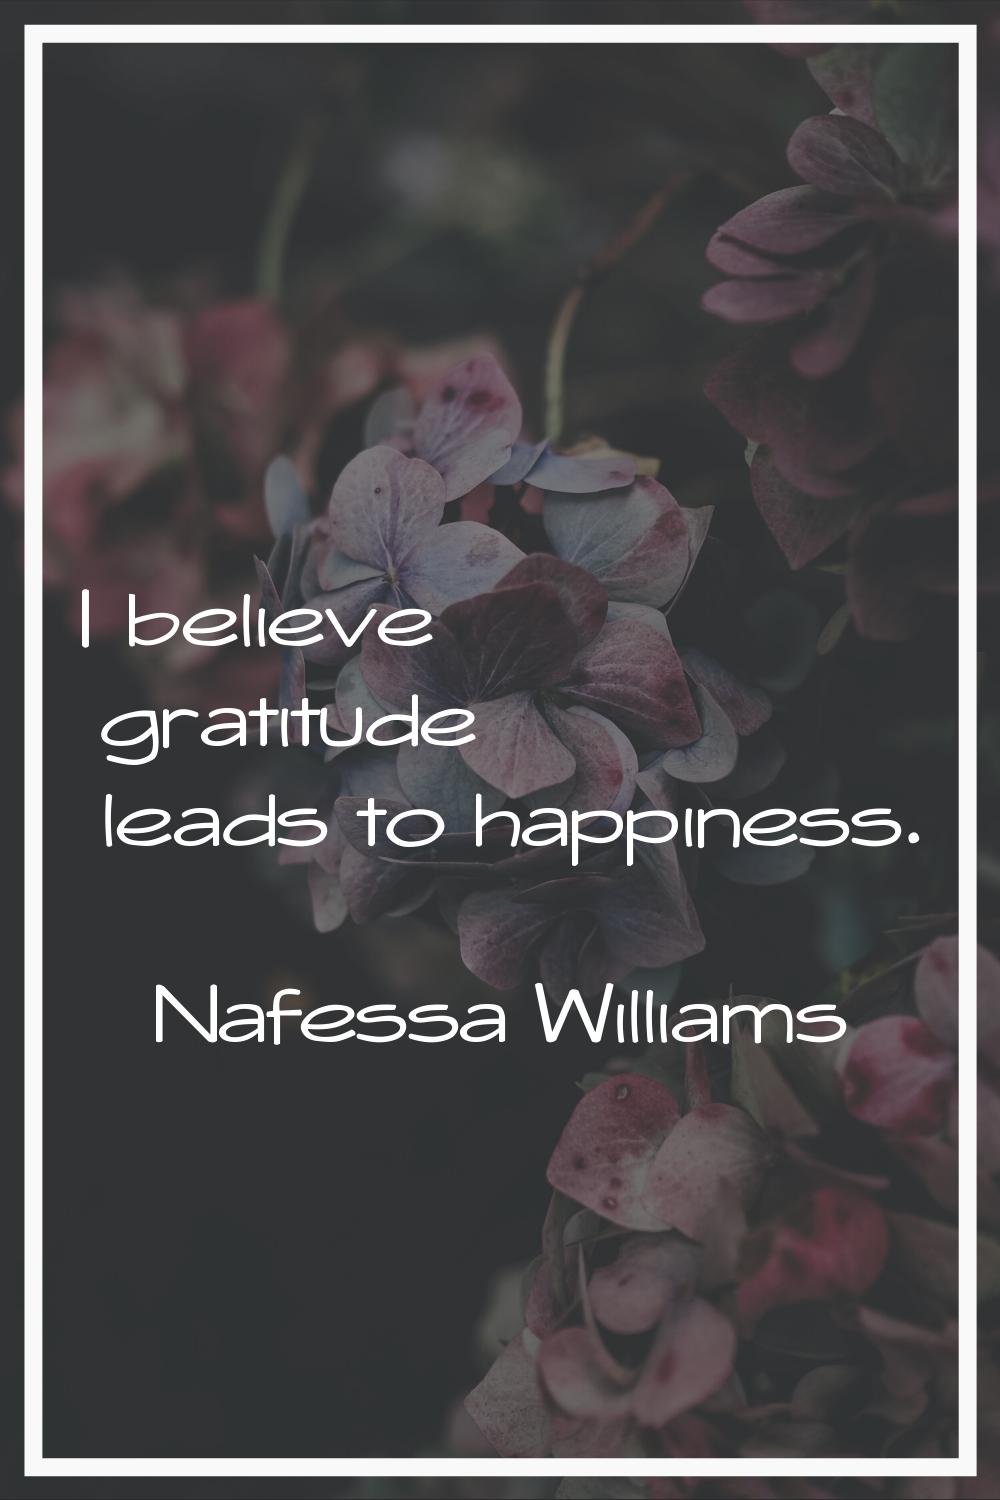 I believe gratitude leads to happiness.